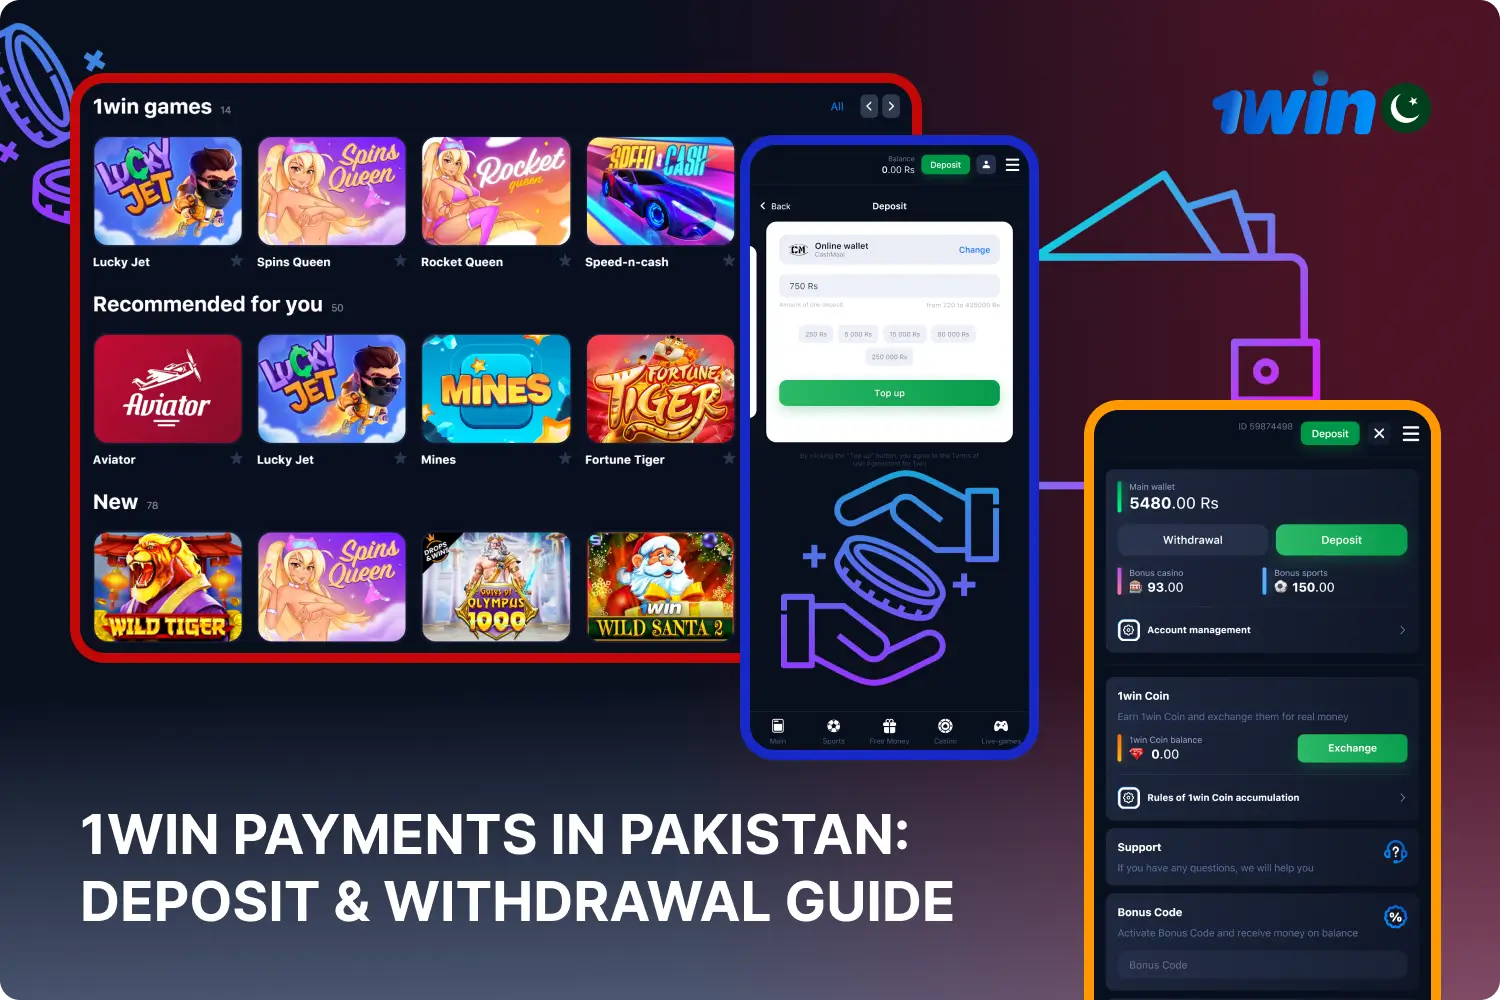 1win provides fast and secure transactions for deposits and withdrawals for players from Pakistan